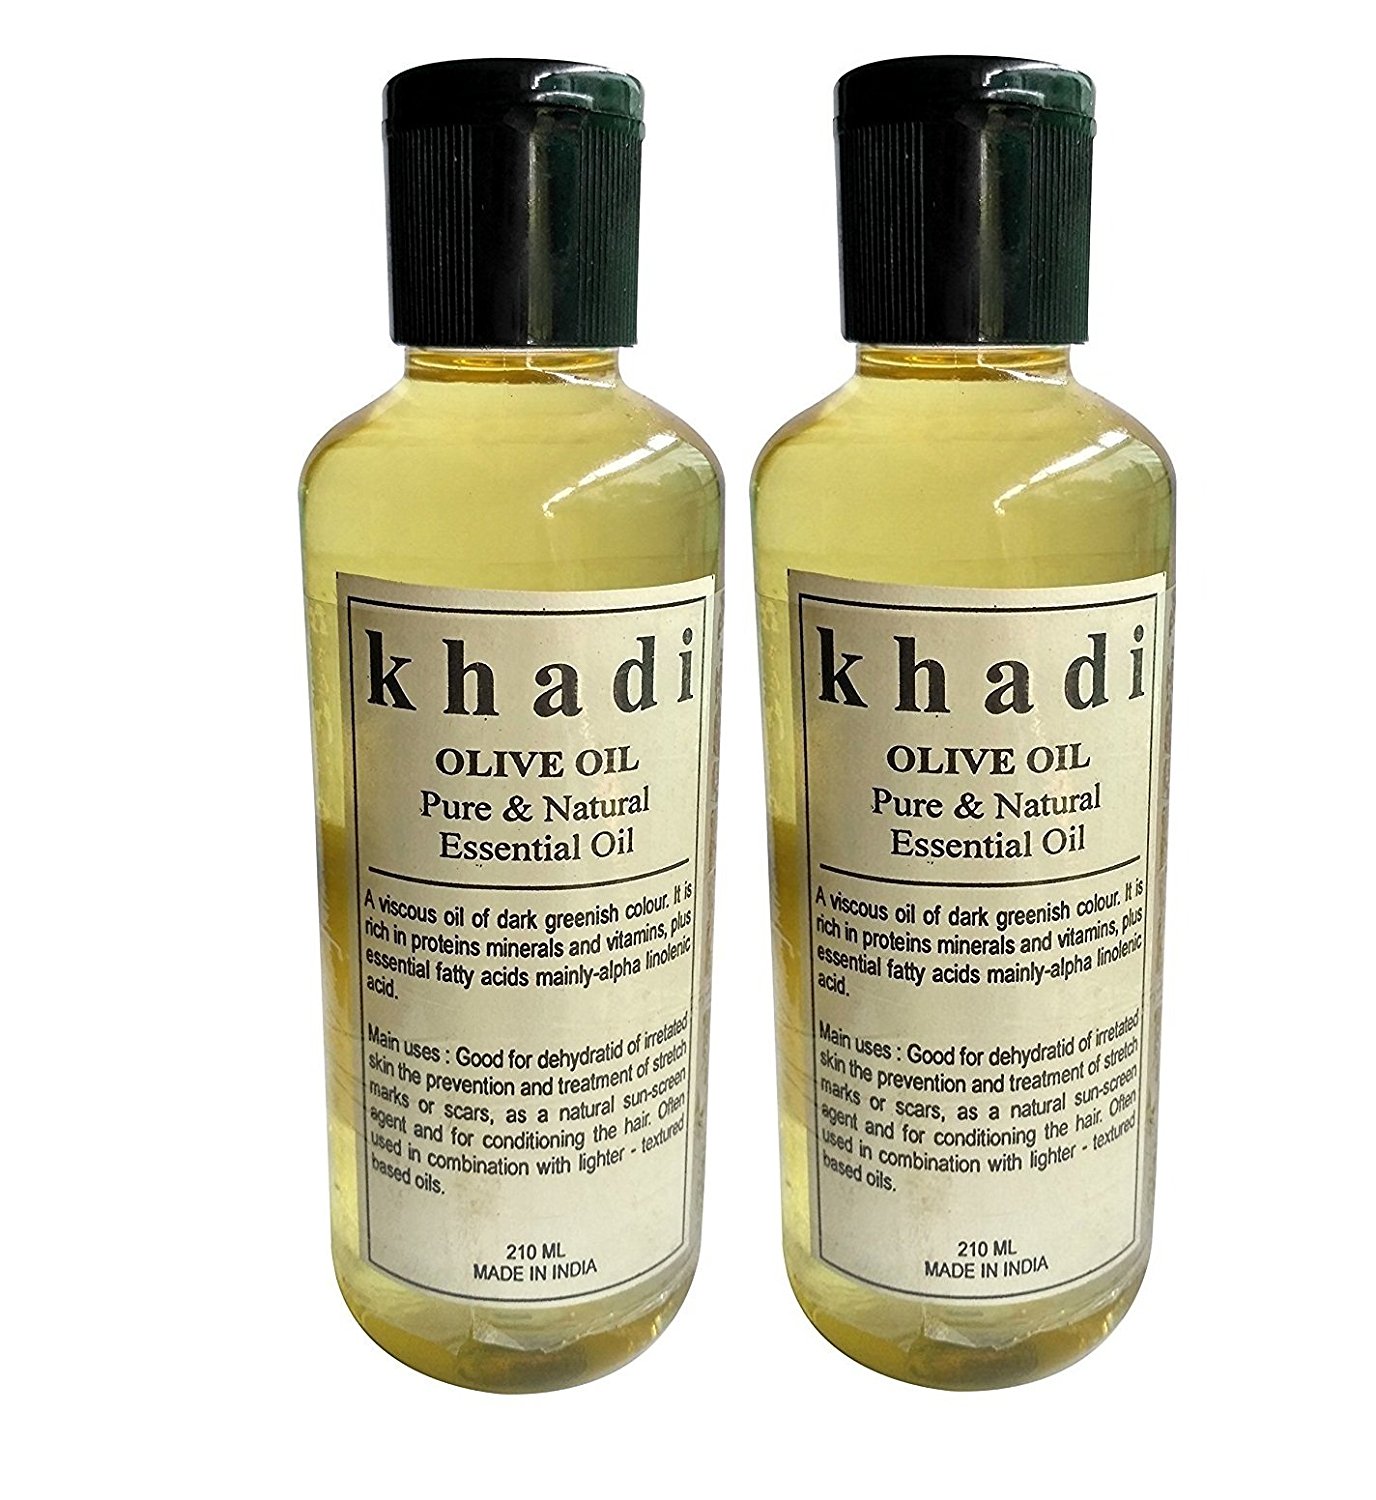 Buy Khadi Olive Oil - 210ml (Set of 2) Online at Low Prices in India ...